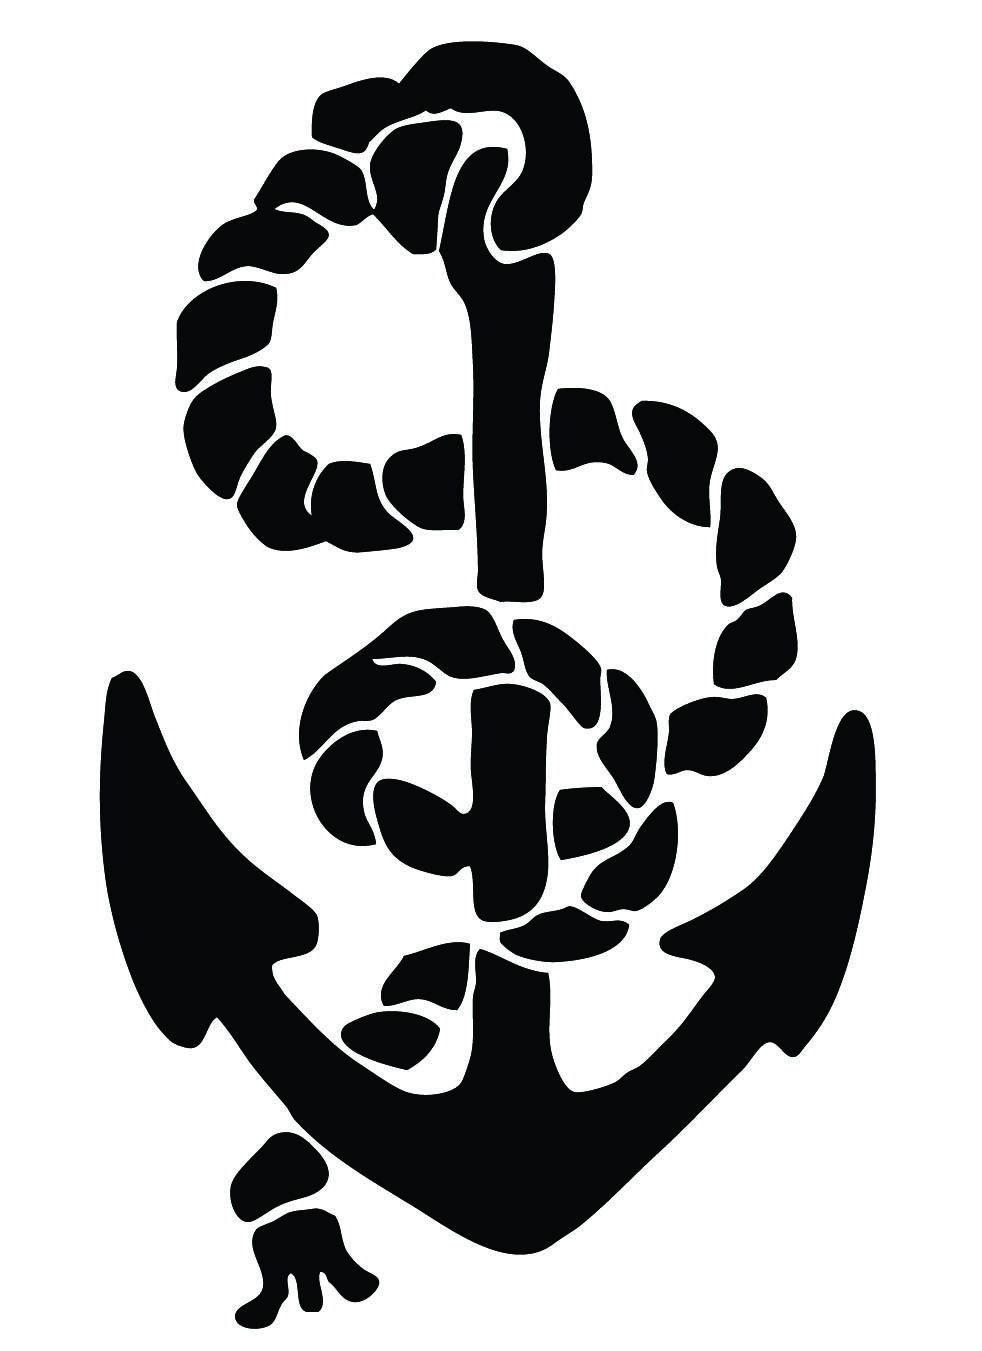 Vintage Nautical Clip Art - 2 Anchor Graphics - The Graphics Fairy